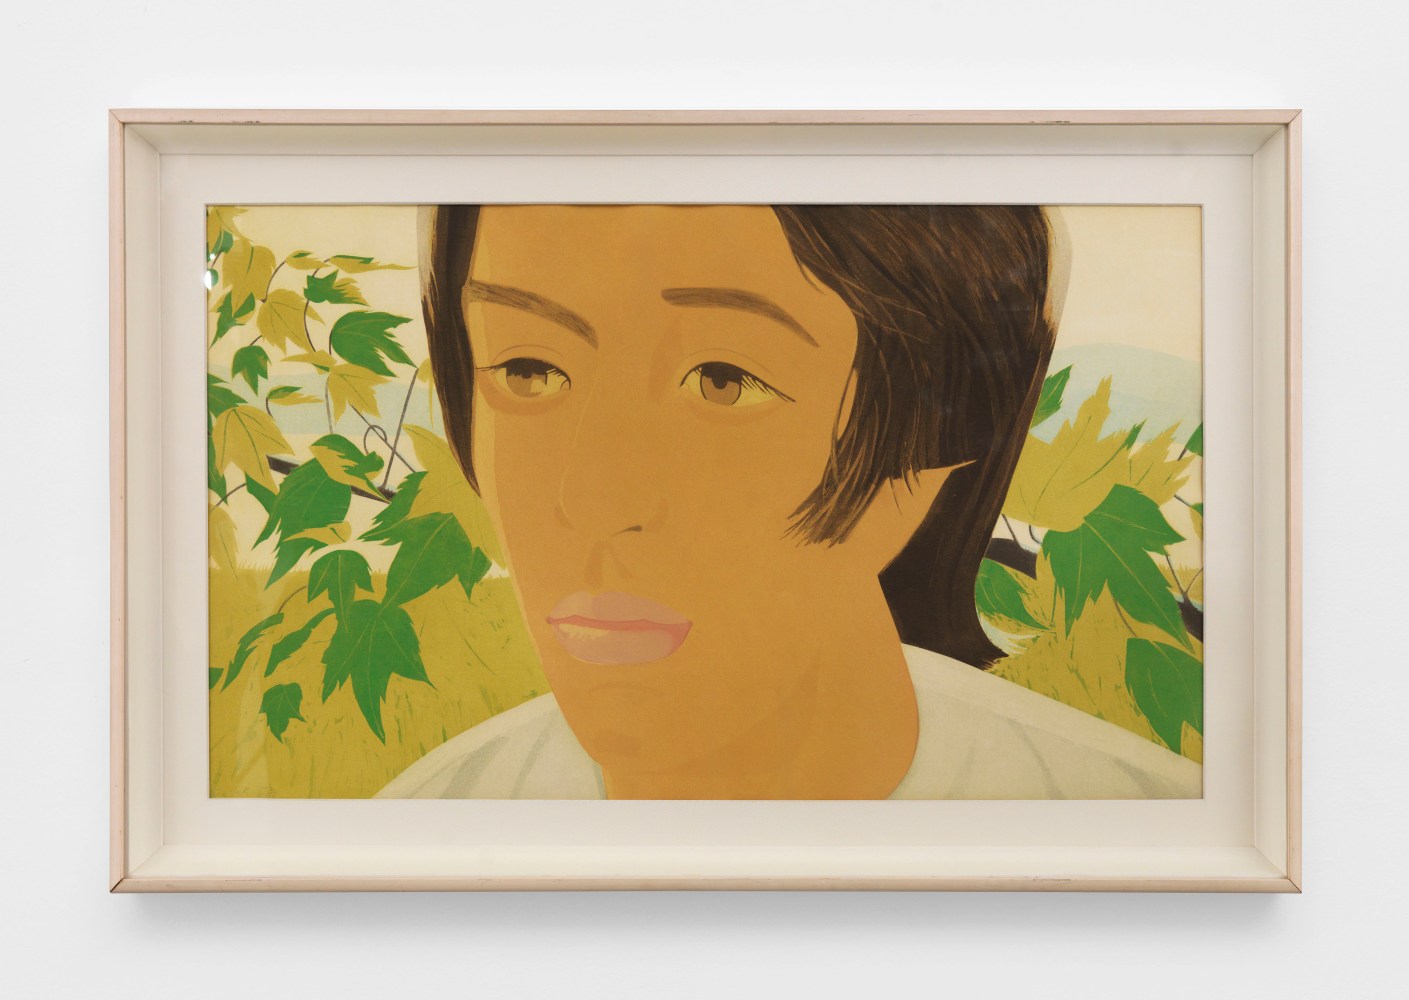 Framed color aquatint by Alex Katz featuring a boy with brown hair and wearing a white shirt against a green foliage background